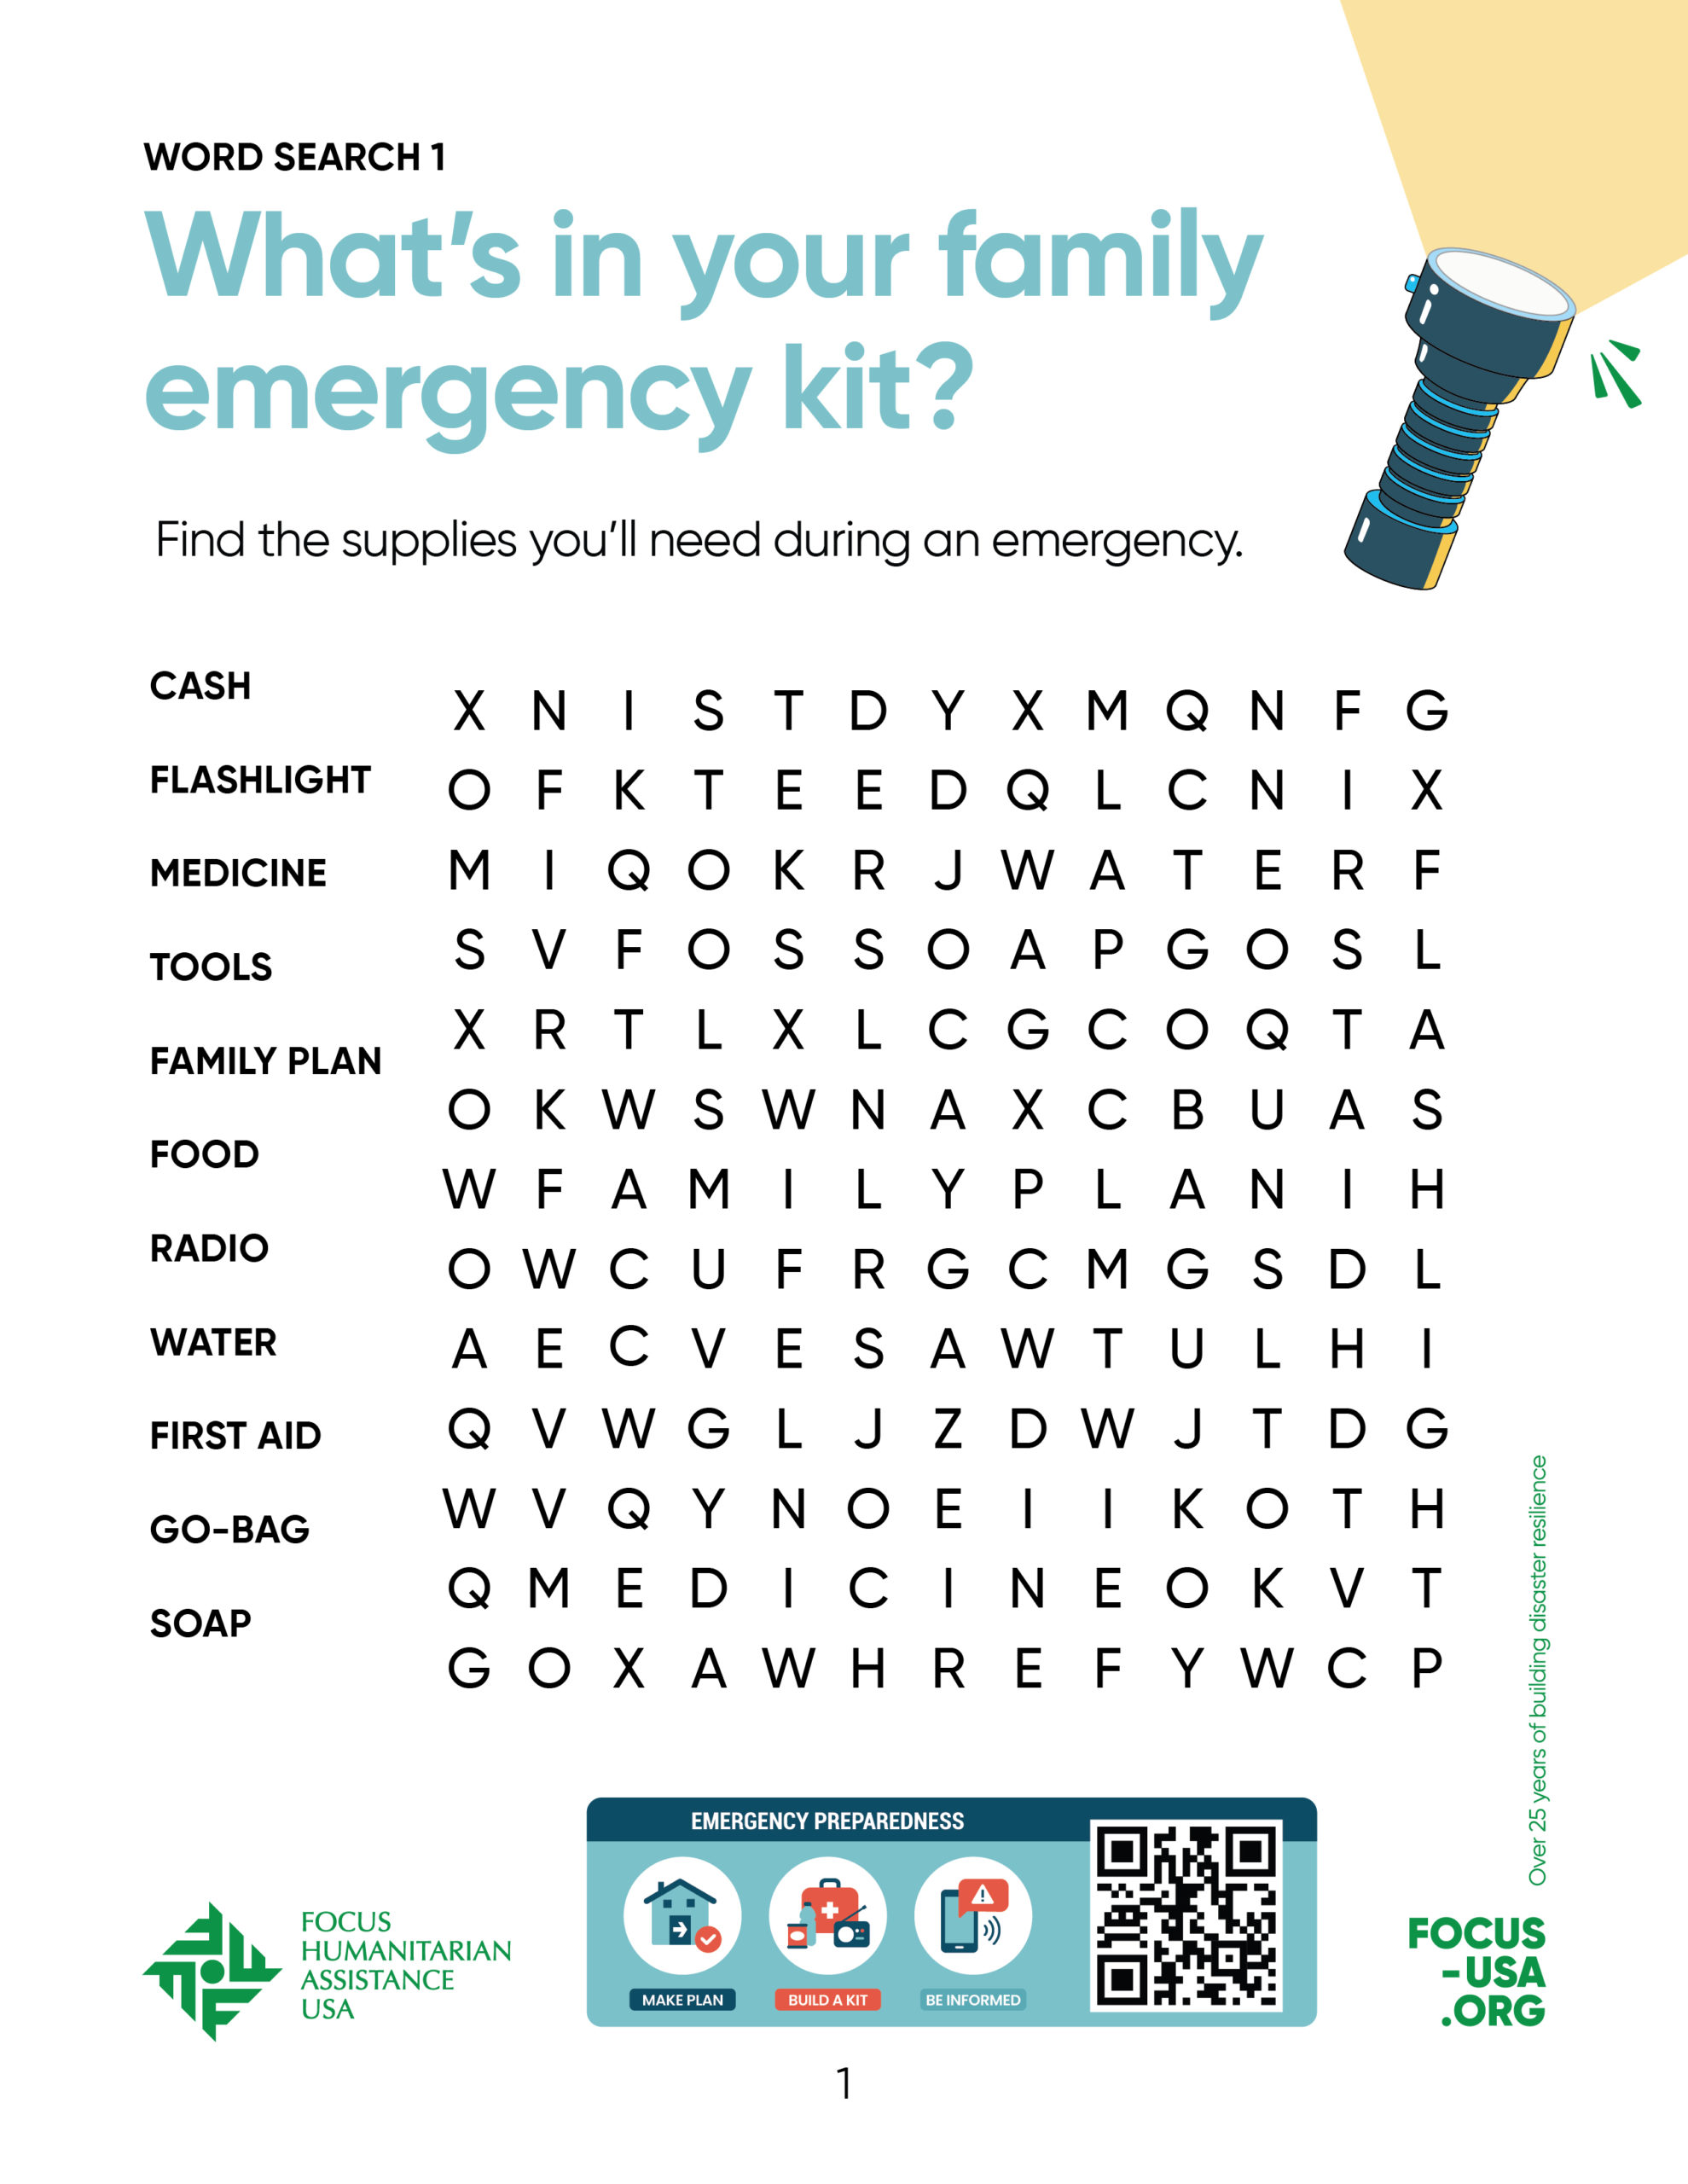 Whats in your family emergency kit?